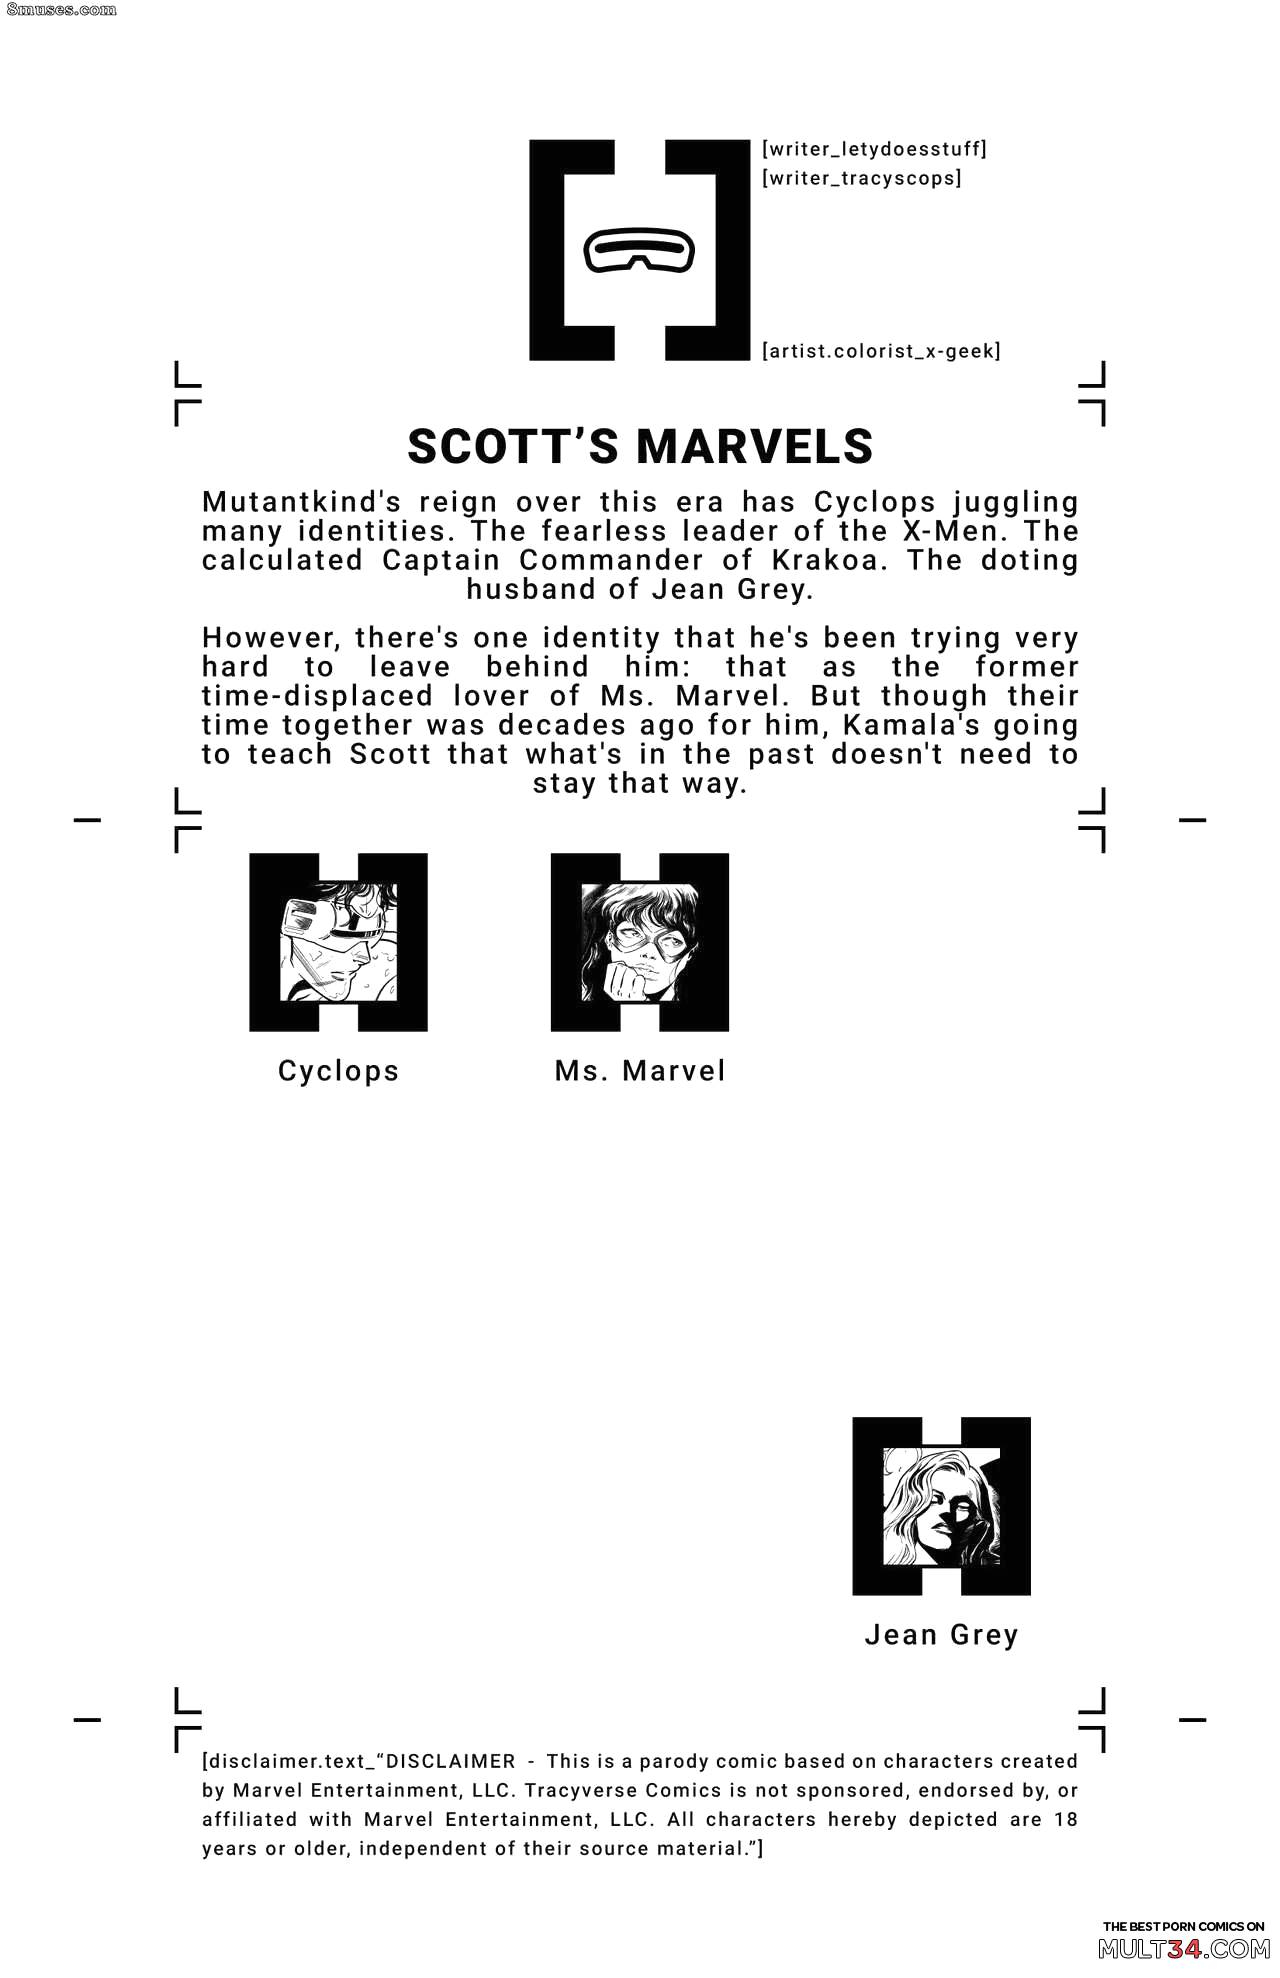 House of XXX - Scott's Marvels page 2